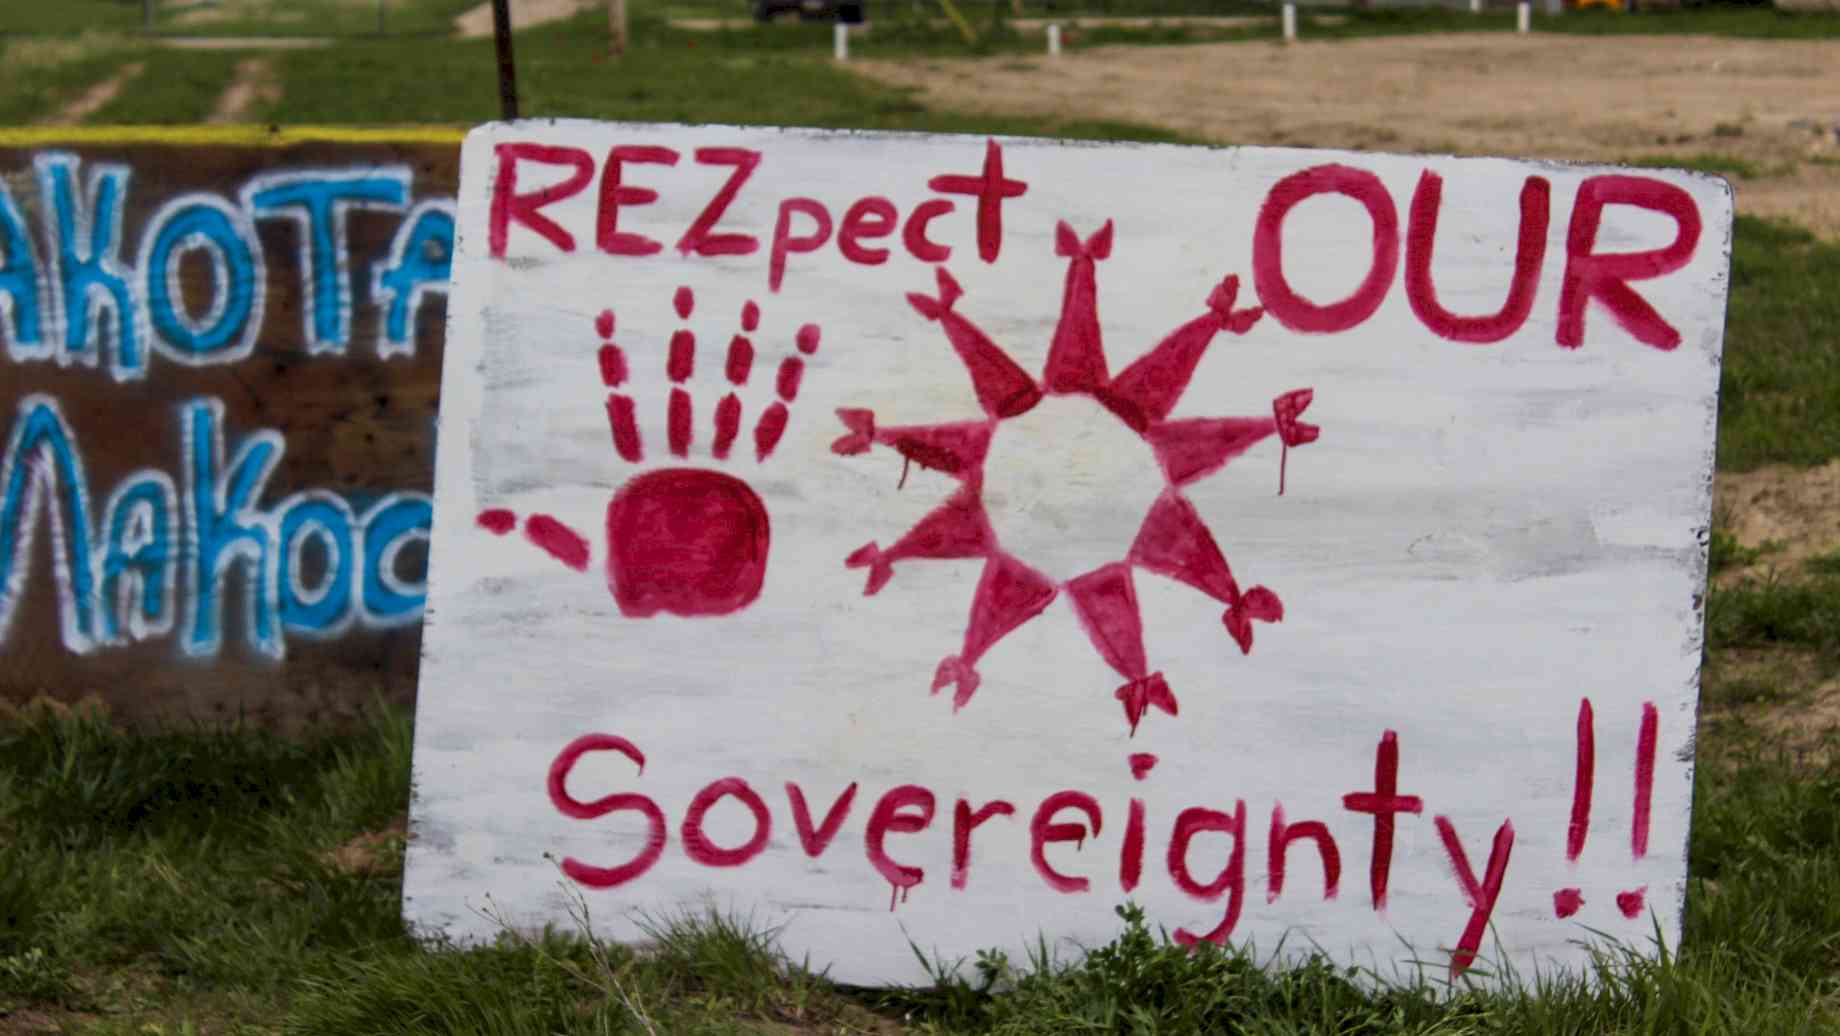 #respectoursovereignty. A piece of wood painted white with red lettering reads "R-E-Zpect our Sovereignty!" with a painted red hand facing palm out, and a circle of red triangles, pointing outward and topped with two additional triangles at the end of each point, facing inward like the letter "M." Credit: Pine Ridge Reservation